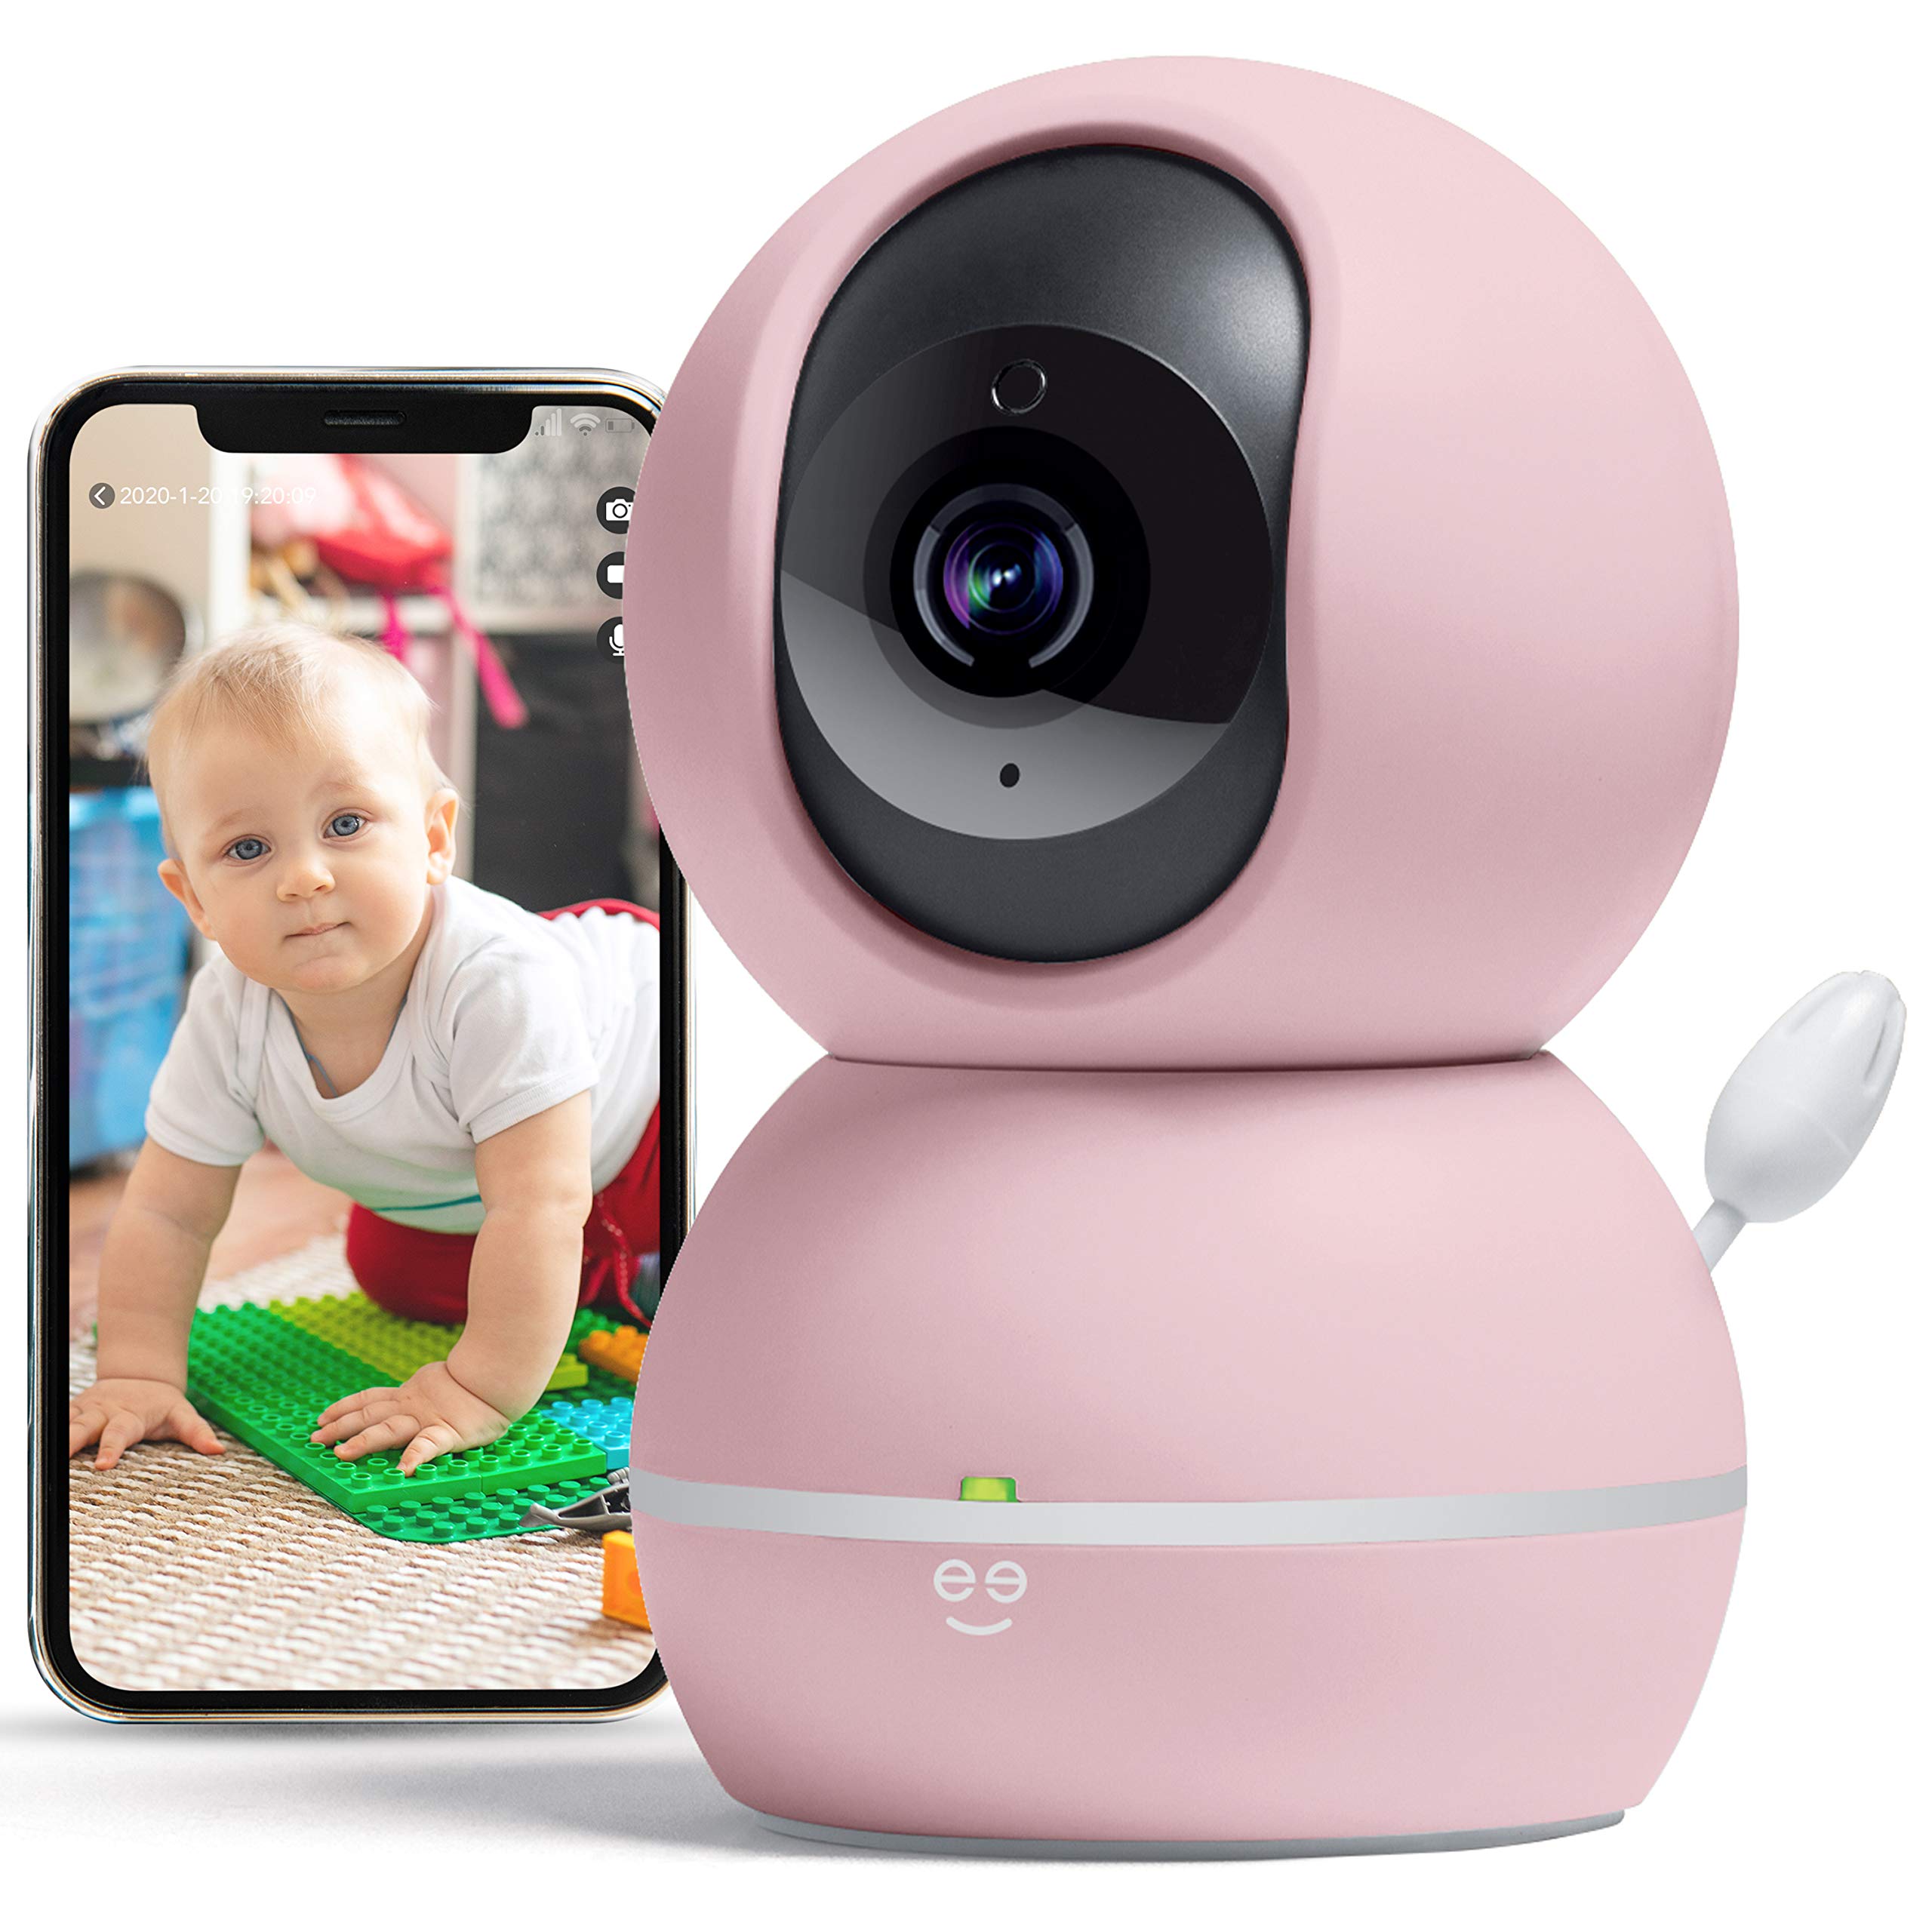 Geeni Smart Home Pet and Baby Monitor with Camera, 1080p Wireless WiFi Camera with Motion and Sound Alert (Pastel Pink)